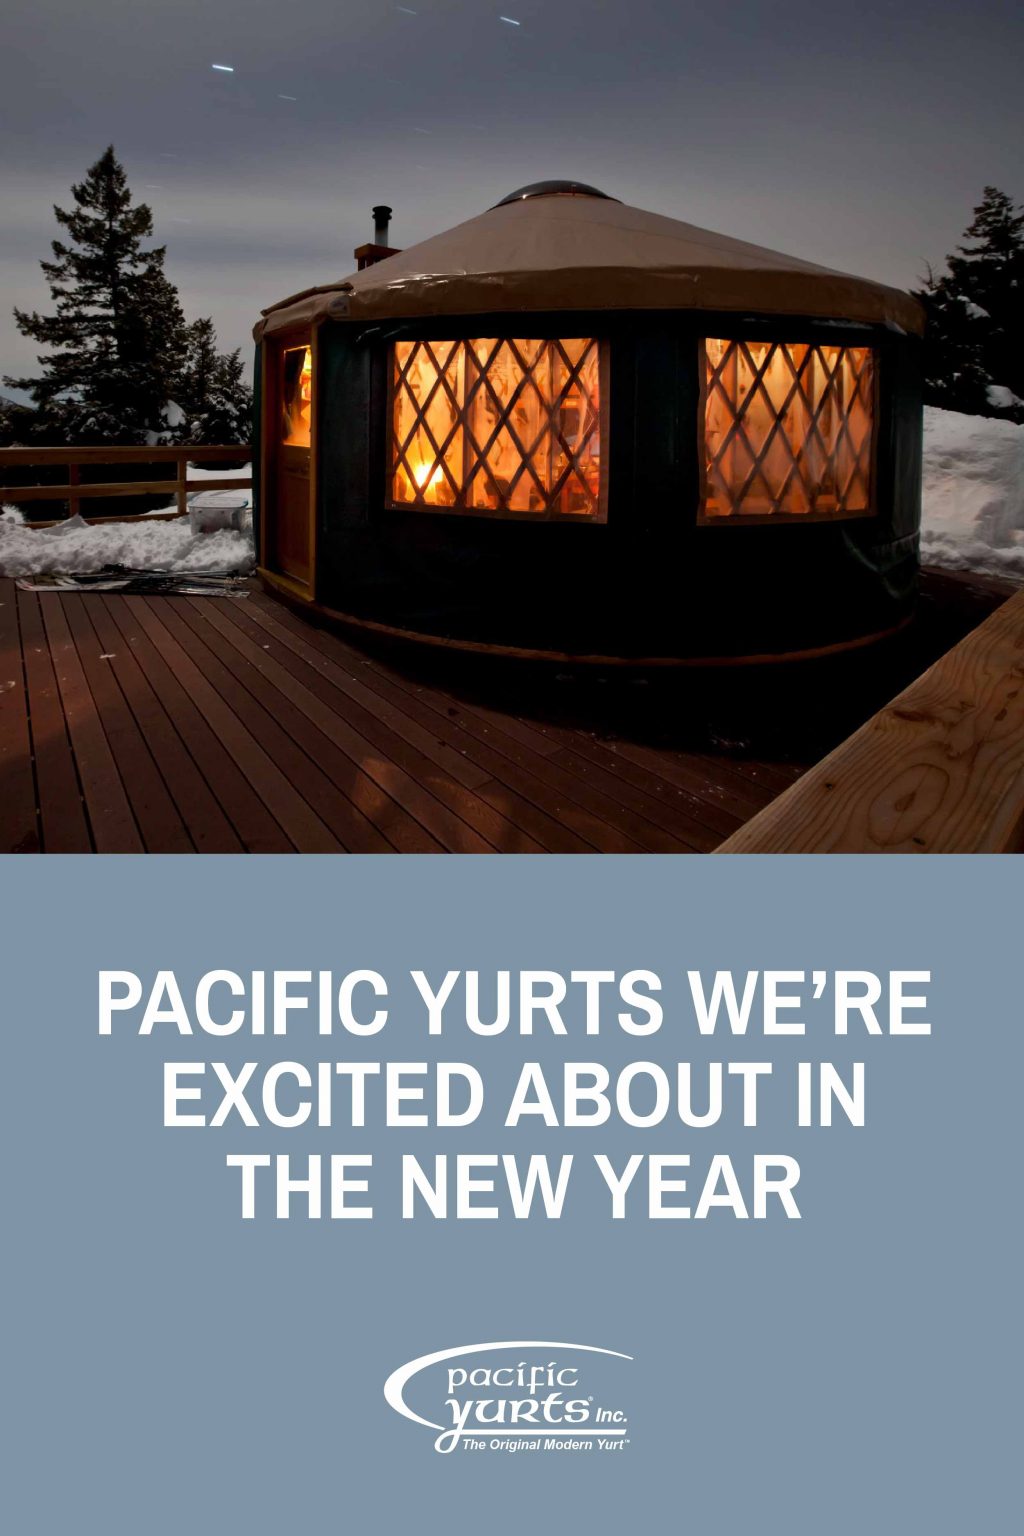 Pacific-Yurts-we-are-excited-about-in-the-new-year